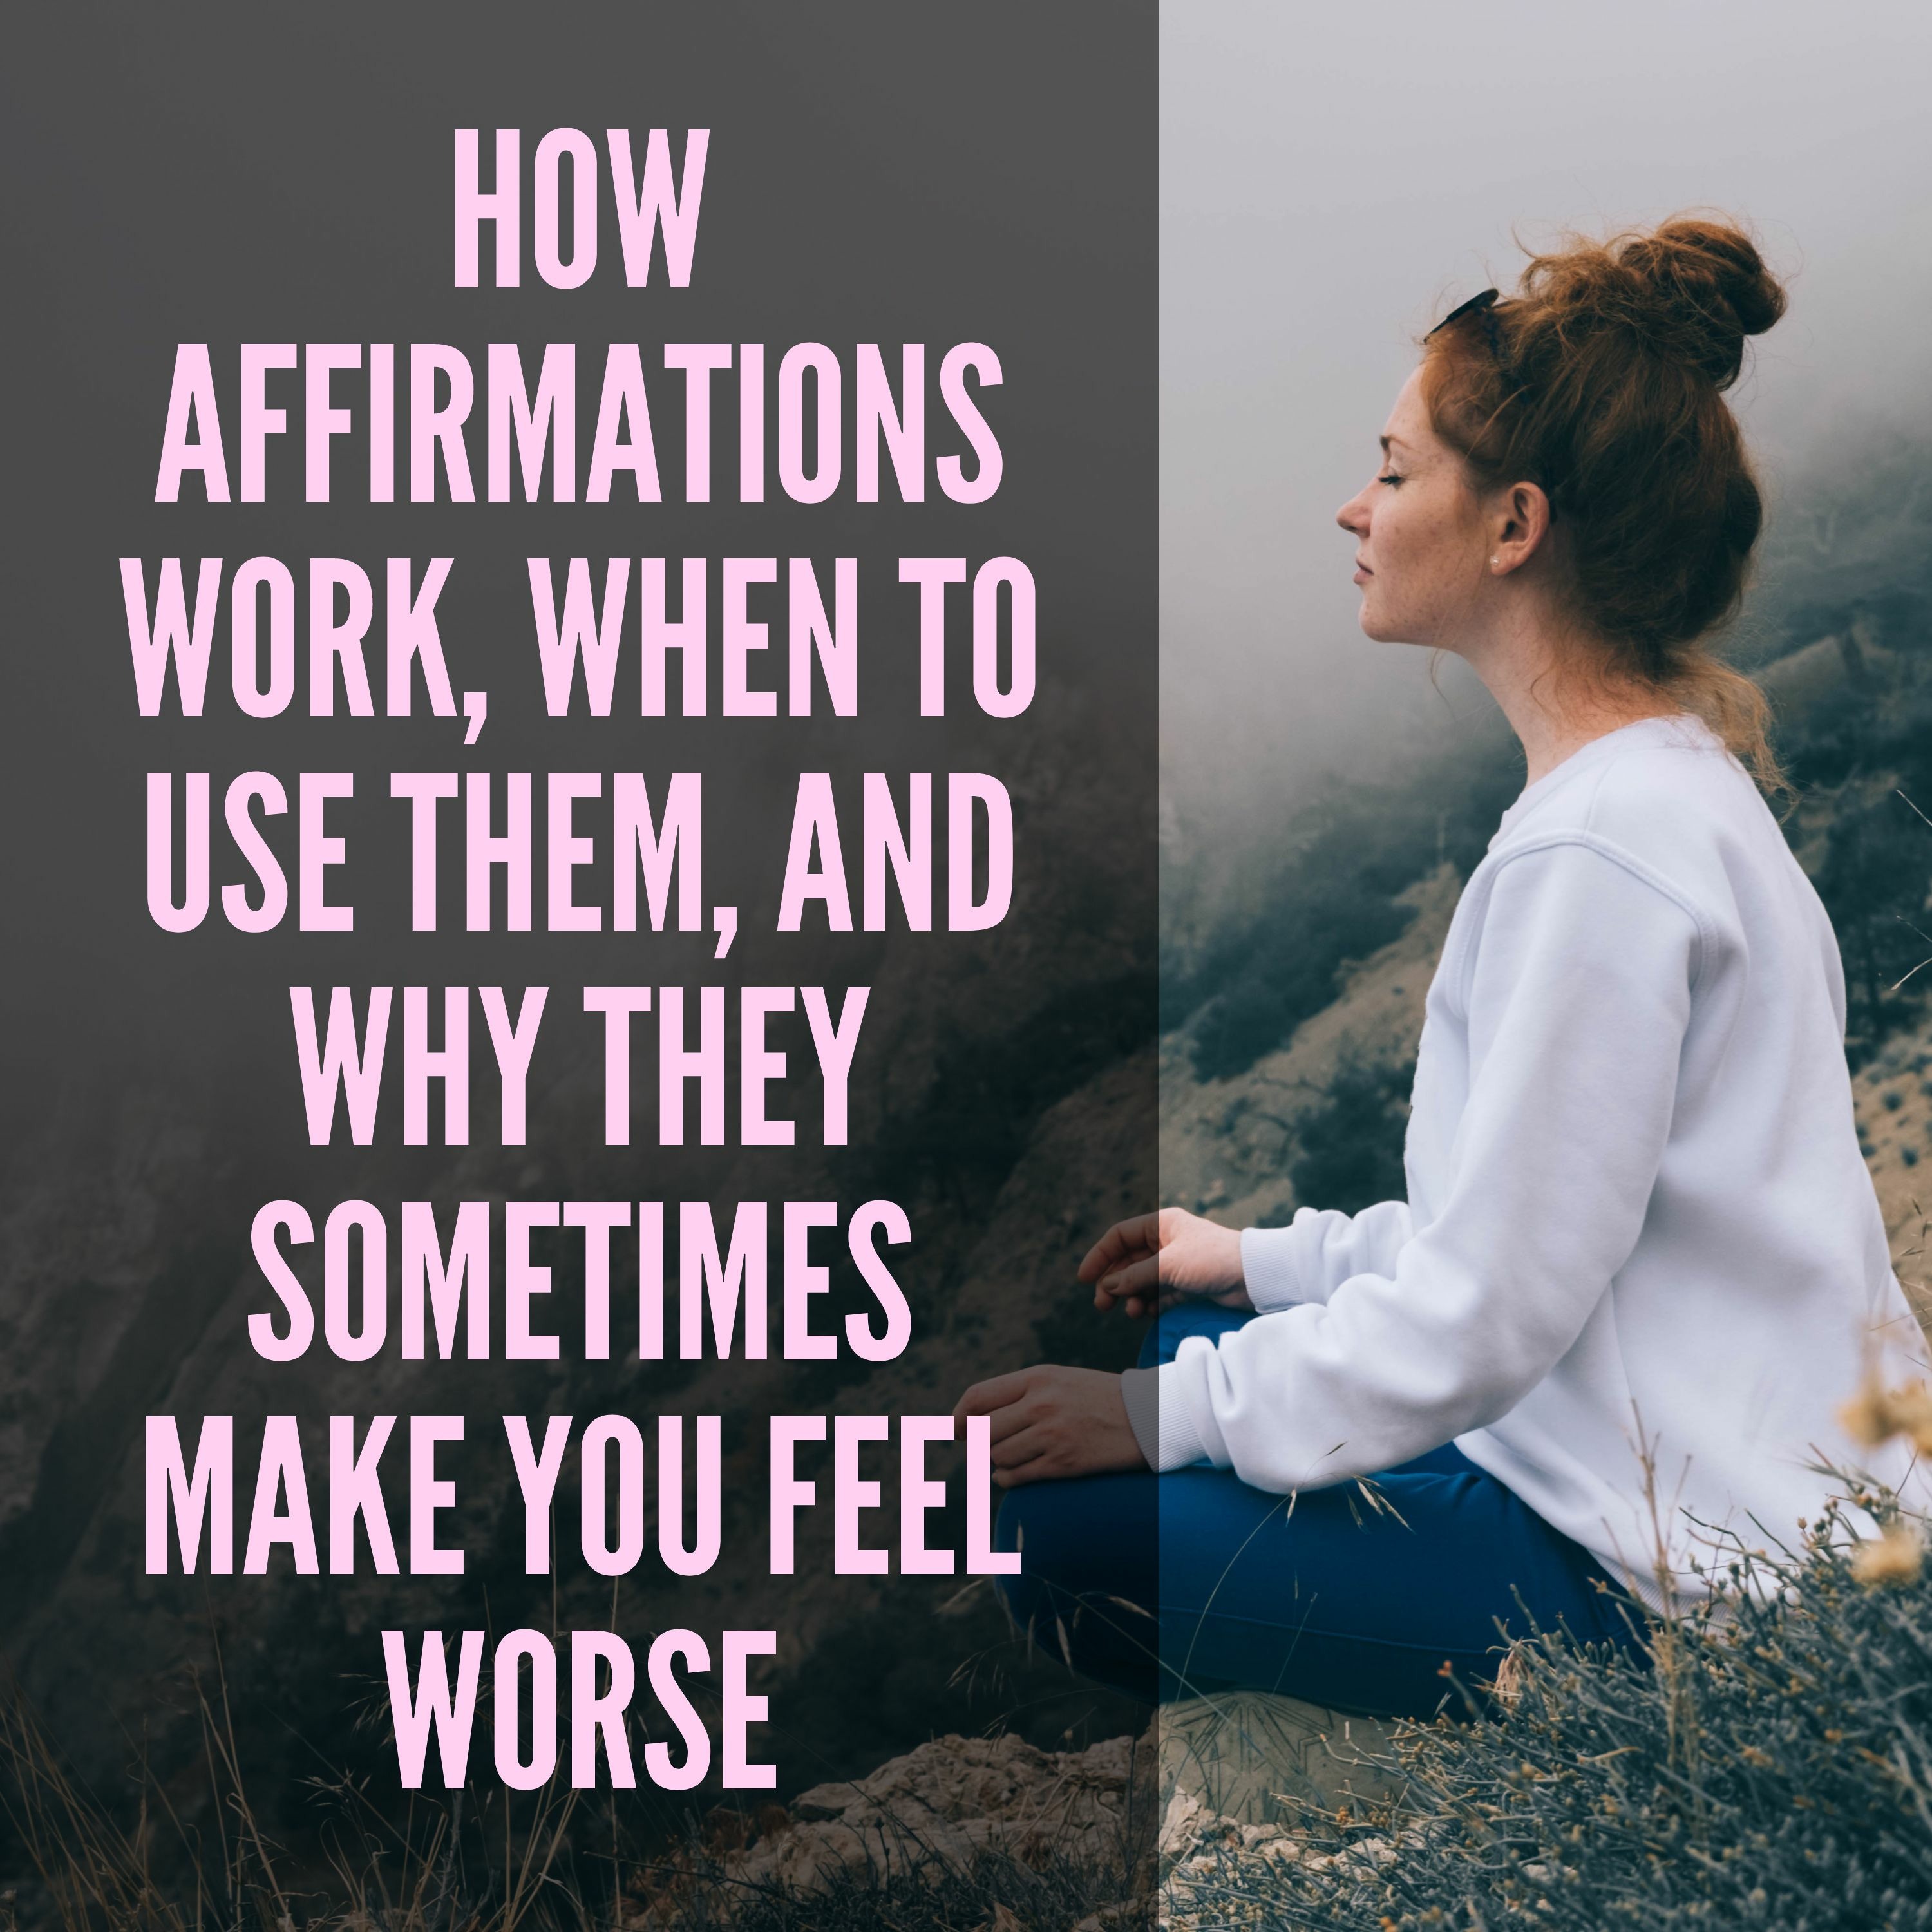 How affirmations work, when to use them, and why they sometimes make you feel worse + Meditation